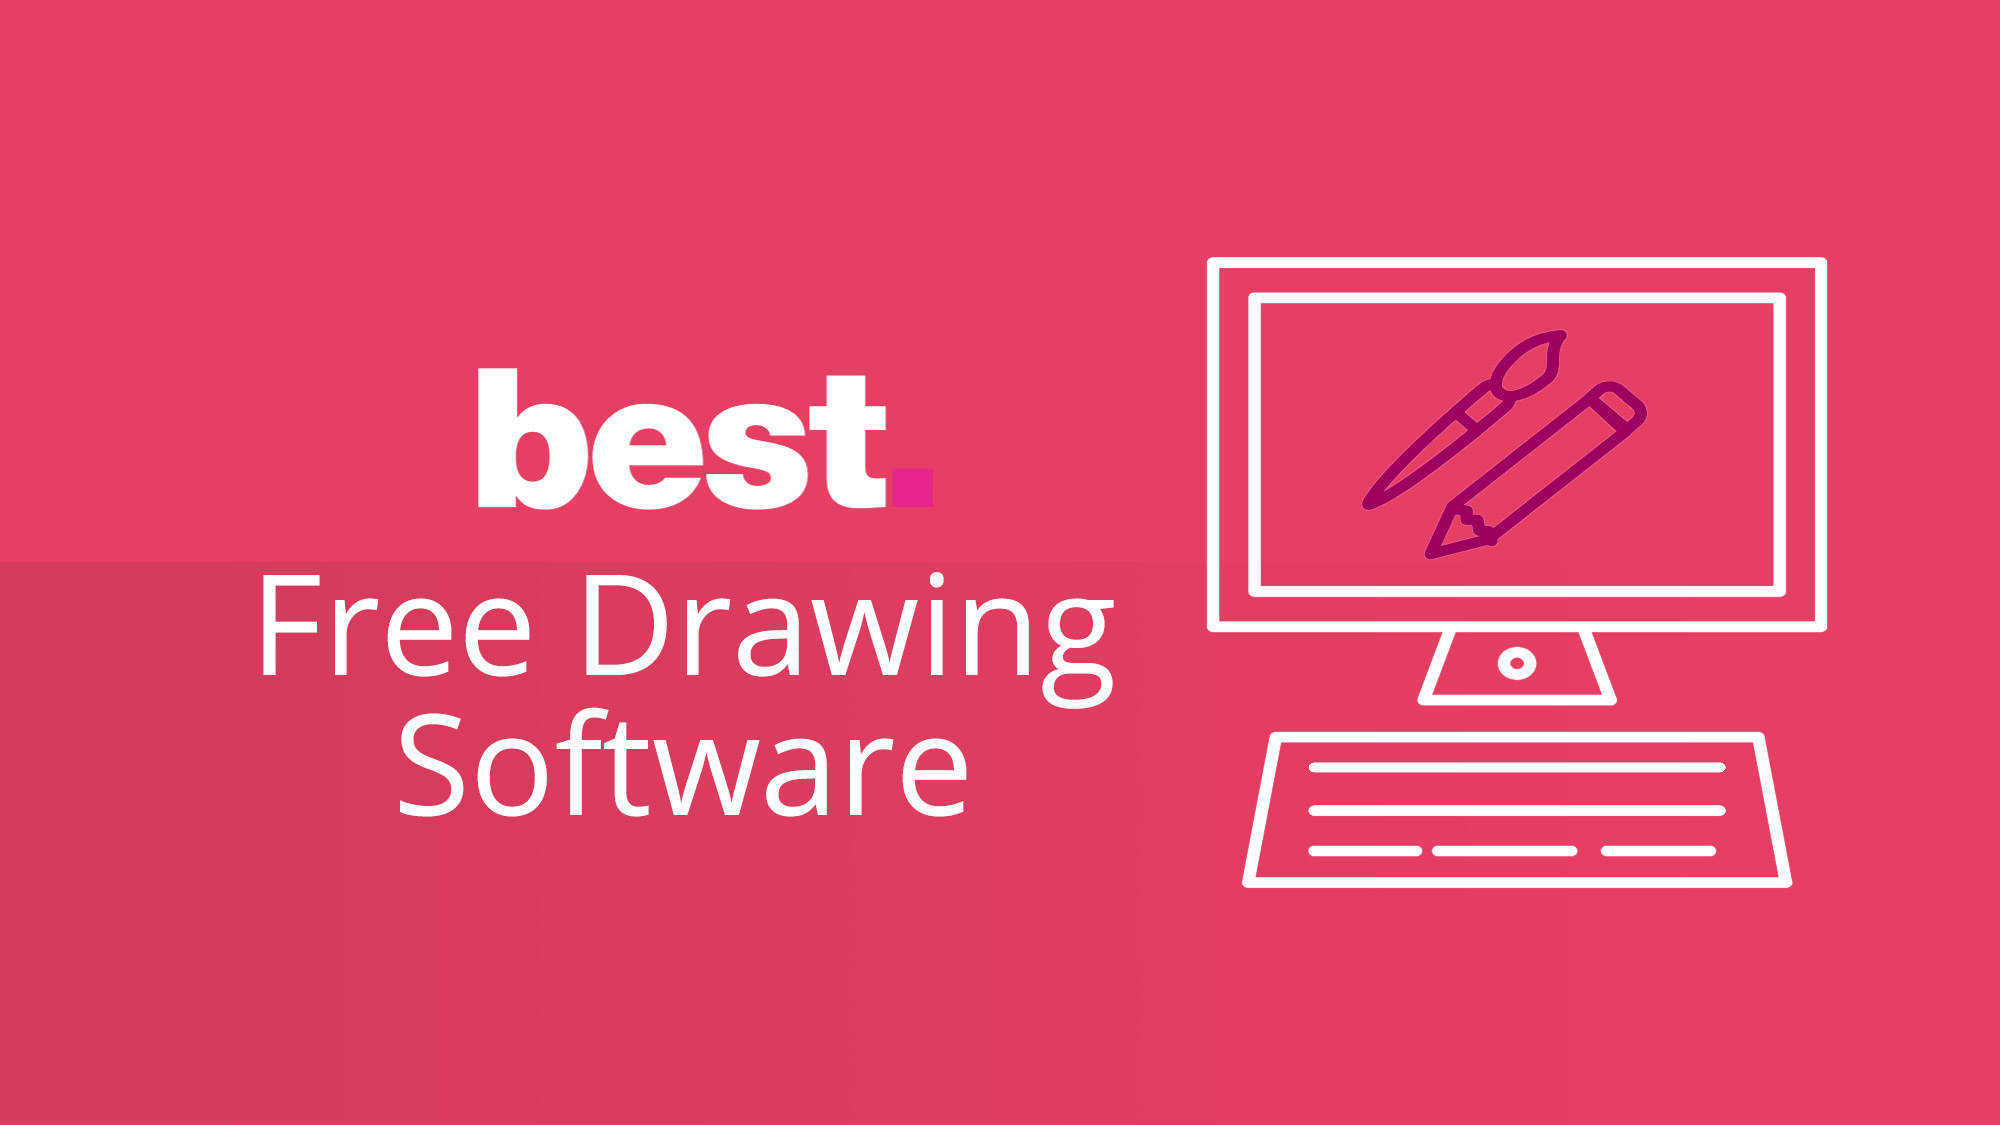 best free drawing software for windows surface pro